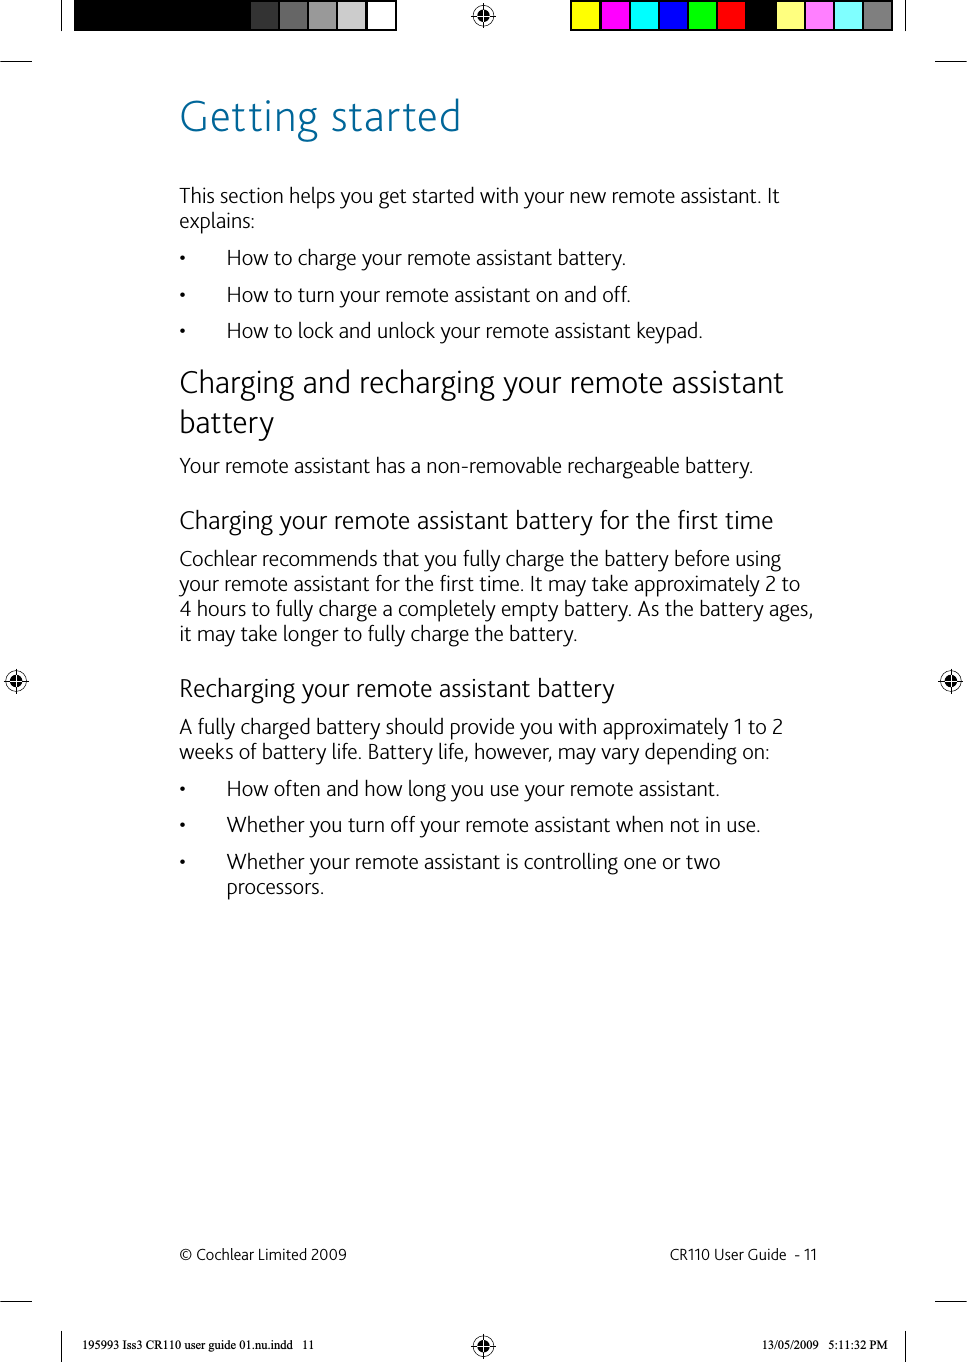 Getting startedThis section helps you get started with your new remote assistant. It explains:How to charge your remote assistant battery.• How to turn your remote assistant on and off.• How to lock and unlock your remote assistant keypad.•  Charging and recharging your remote assistant batteryYour remote assistant has a non-removable rechargeable battery. Charging your remote assistant battery for the ﬁ rst timeCochlear recommends that you fully charge the battery before using your remote assistant for the ﬁ rst time. It may take approximately 2 to 4 hours to fully charge a completely empty battery. As the battery ages, it may take longer to fully charge the battery.  Recharging your remote assistant batteryA fully charged battery should provide you with approximately 1 to 2 weeks of battery life. Battery life, however, may vary depending on:How often and how long you use your remote assistant.• Whether you turn off your remote assistant when not in use.• Whether your remote assistant is controlling one or two • processors.© Cochlear Limited 2009  CR110 User Guide  - 11195993 Iss3 CR110 user guide 01.nu.indd   11 13/05/2009   5:11:32 PM